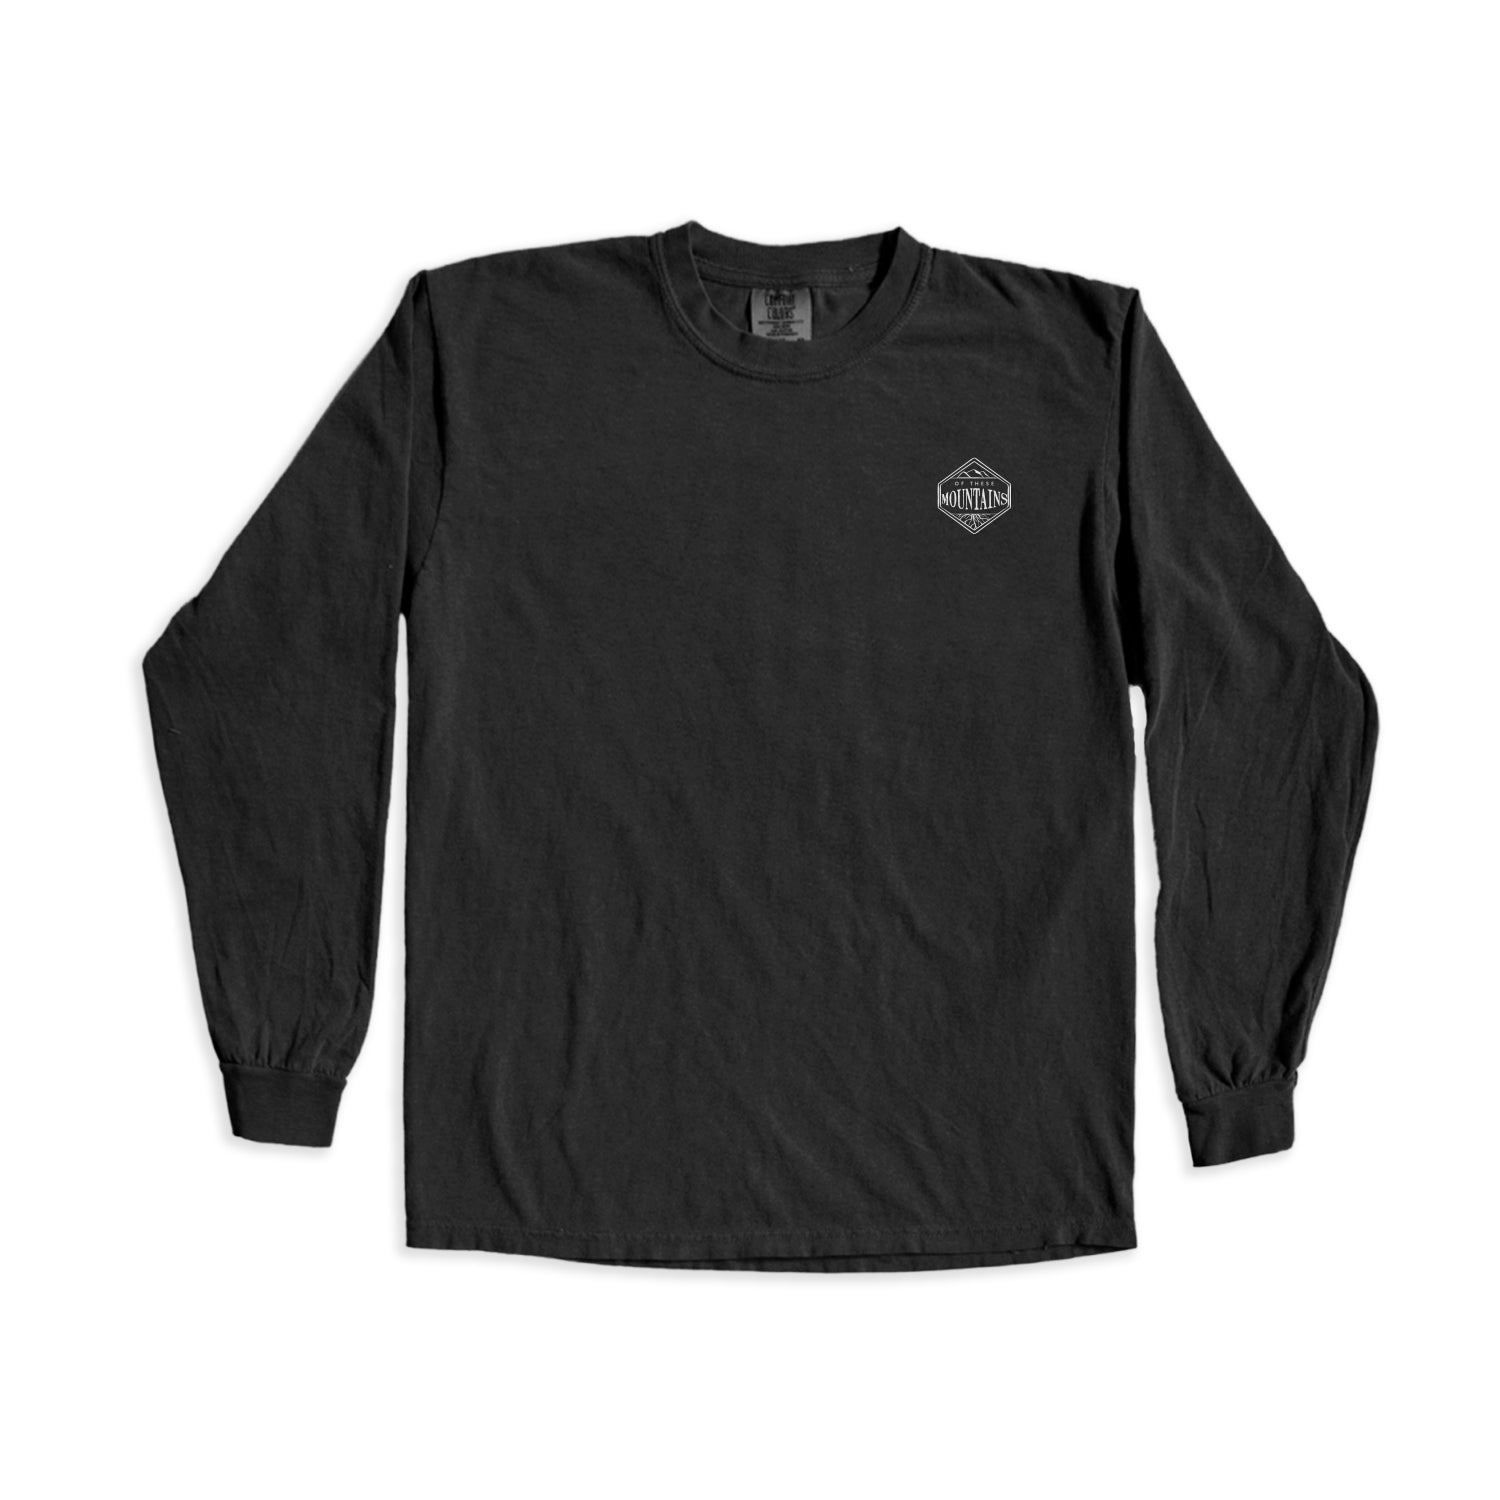 Free Your Mind Long Sleeve Tee